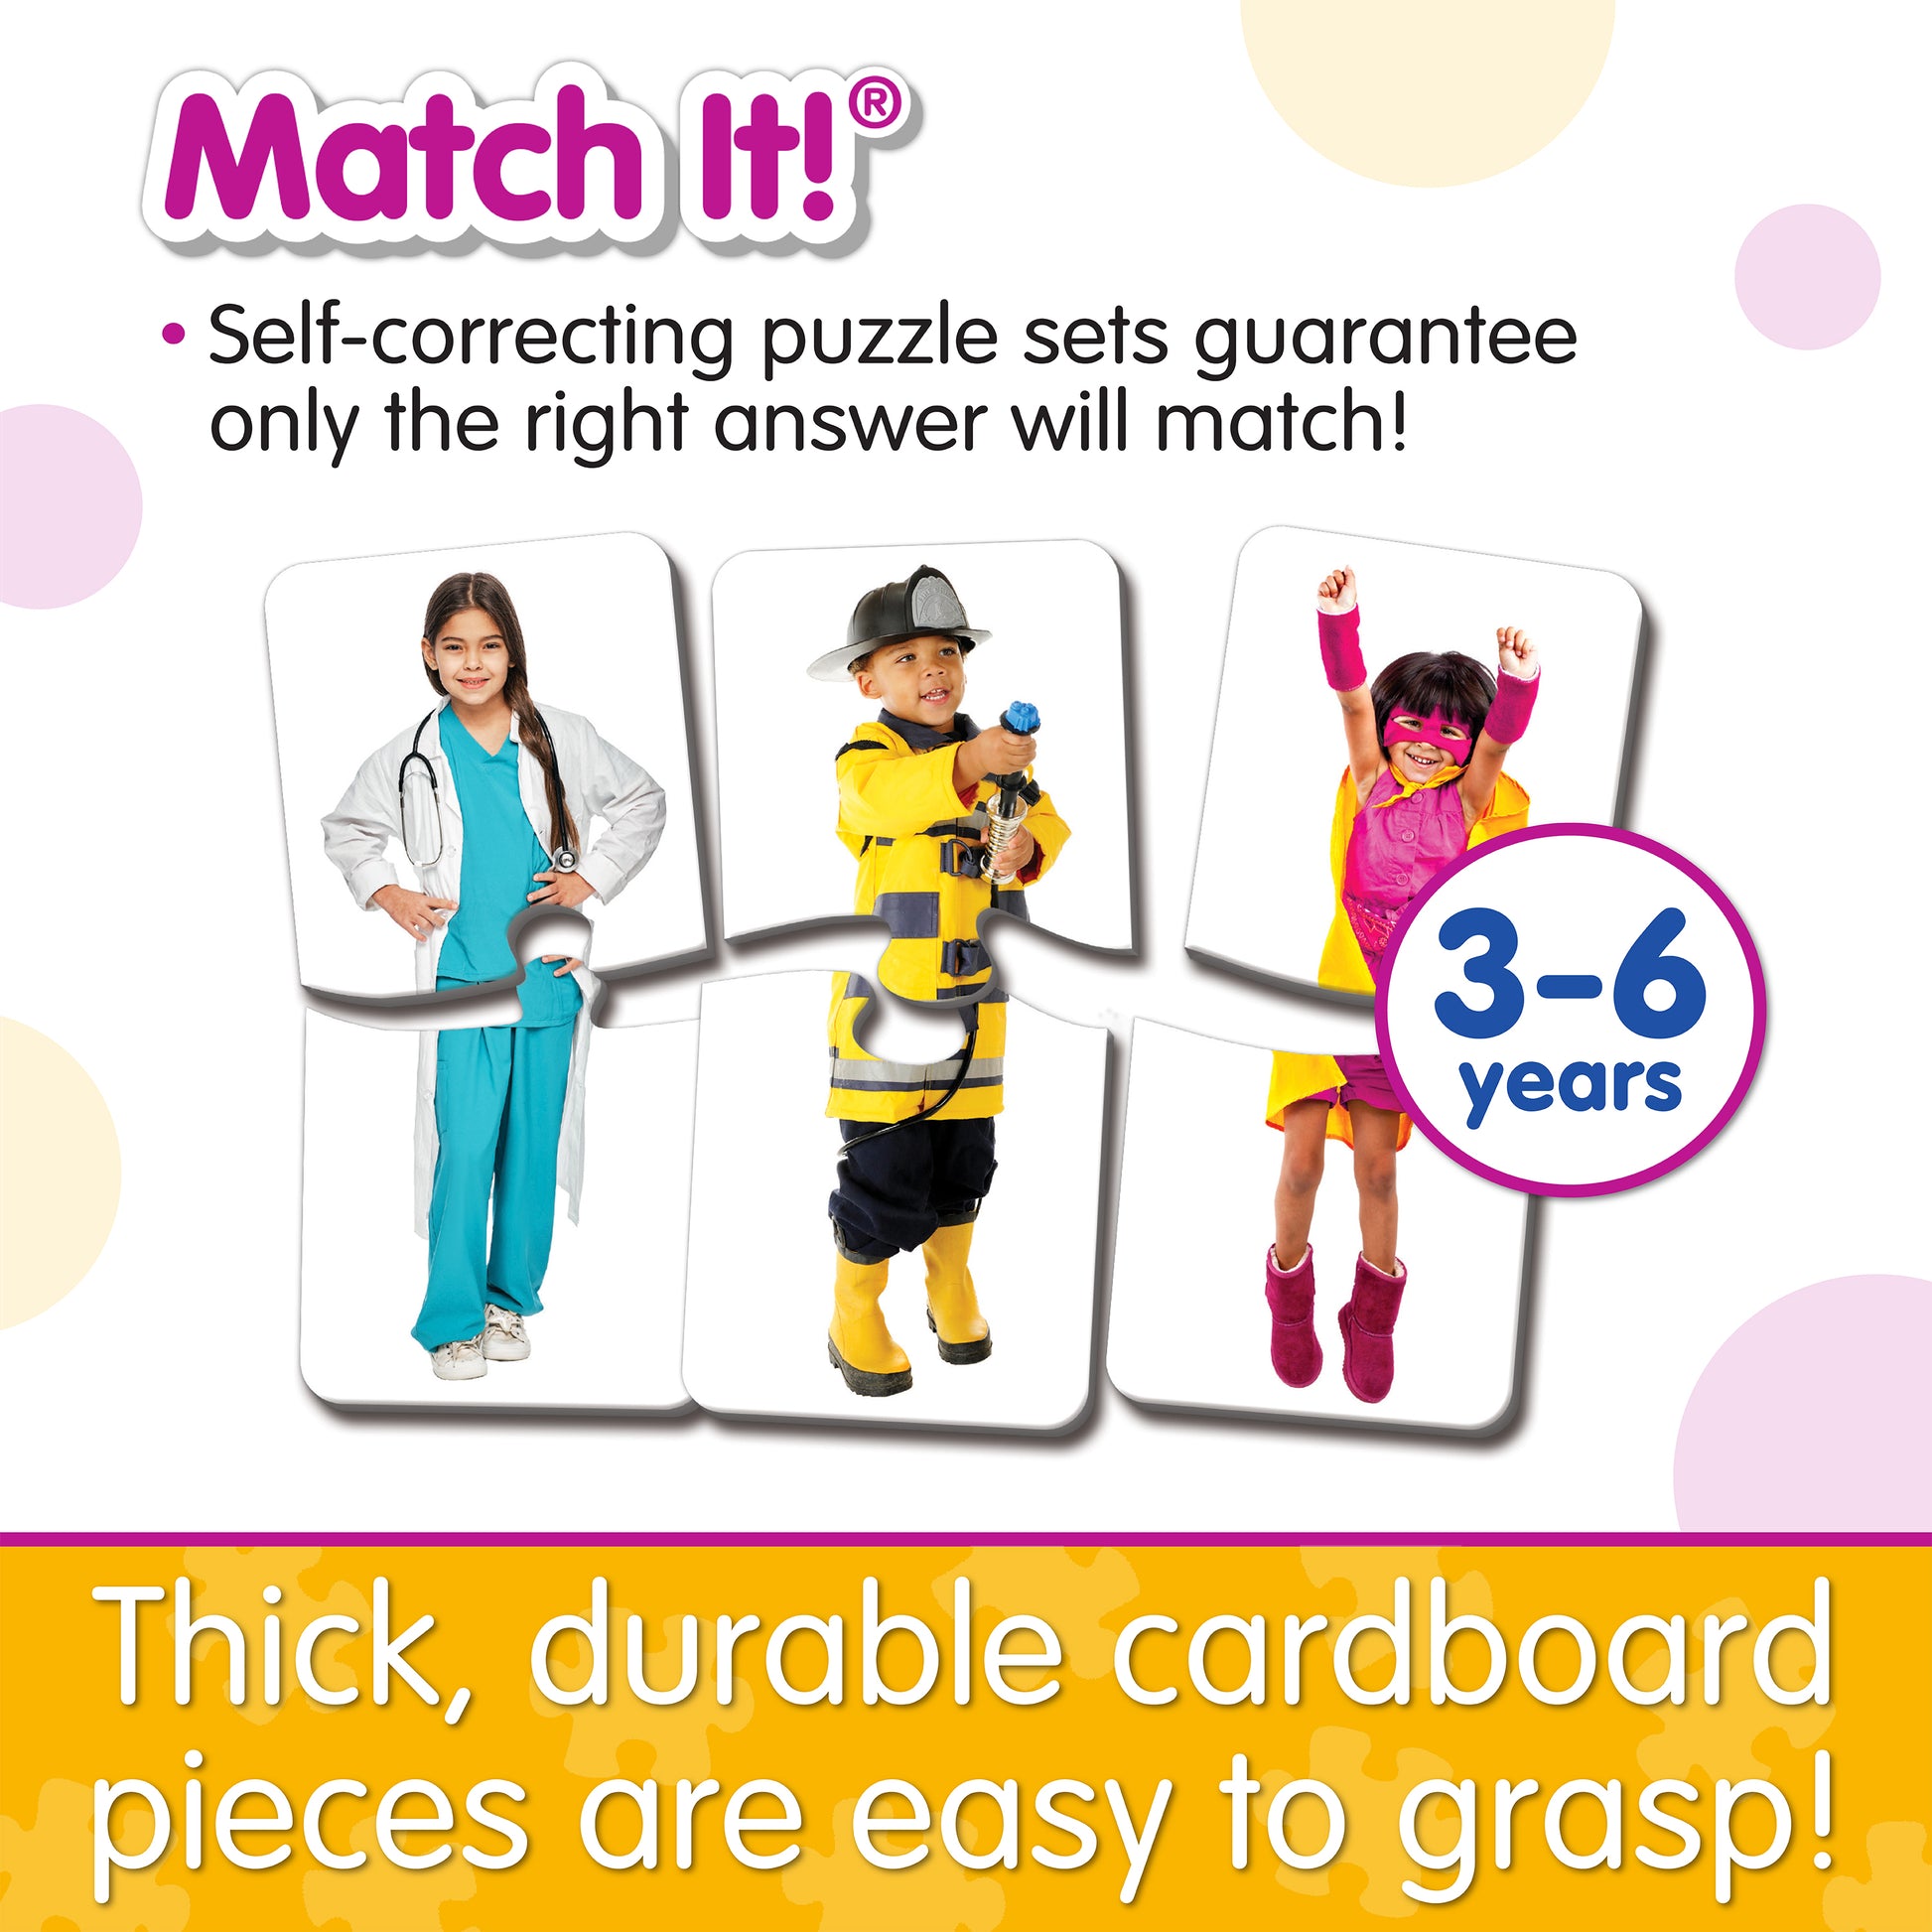 Infographic about Match It - Who Am I's features that says, "Thick, durable cardboard pieces are easy to grasp!"